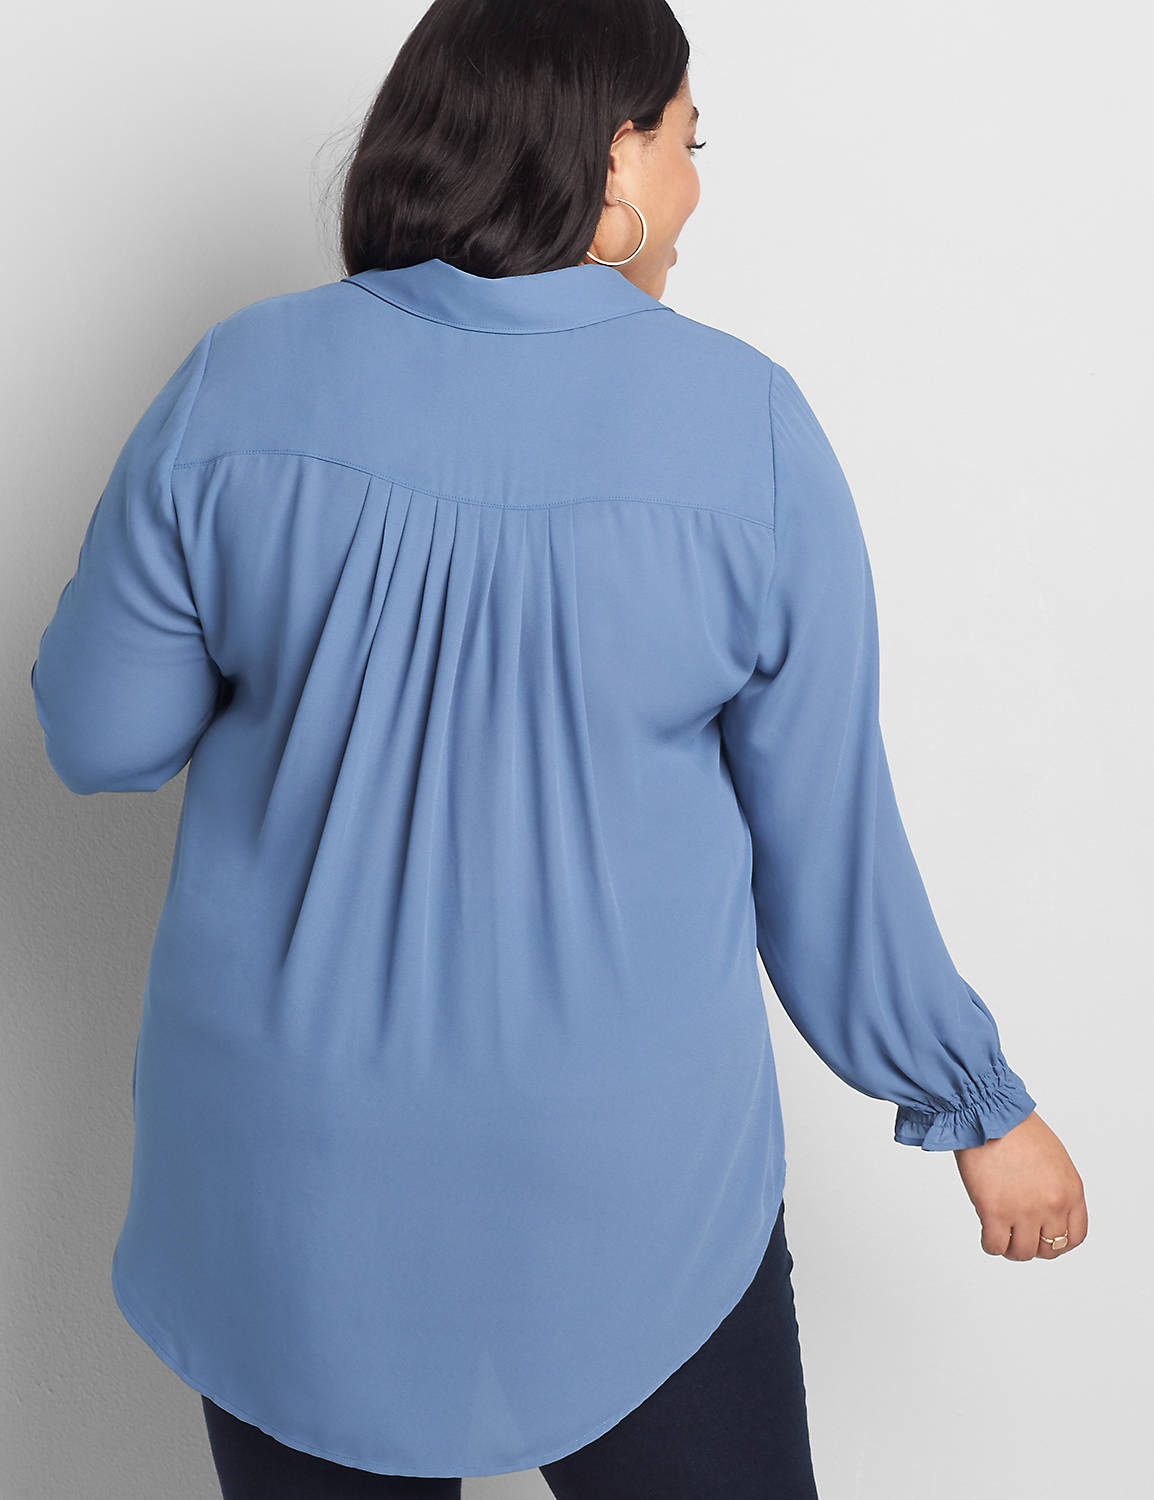 Long Sleeve Button Front Smock Cuff Soft Shirt 1118316:PANTONE Moonlight Blue:10/12 Product Image 2